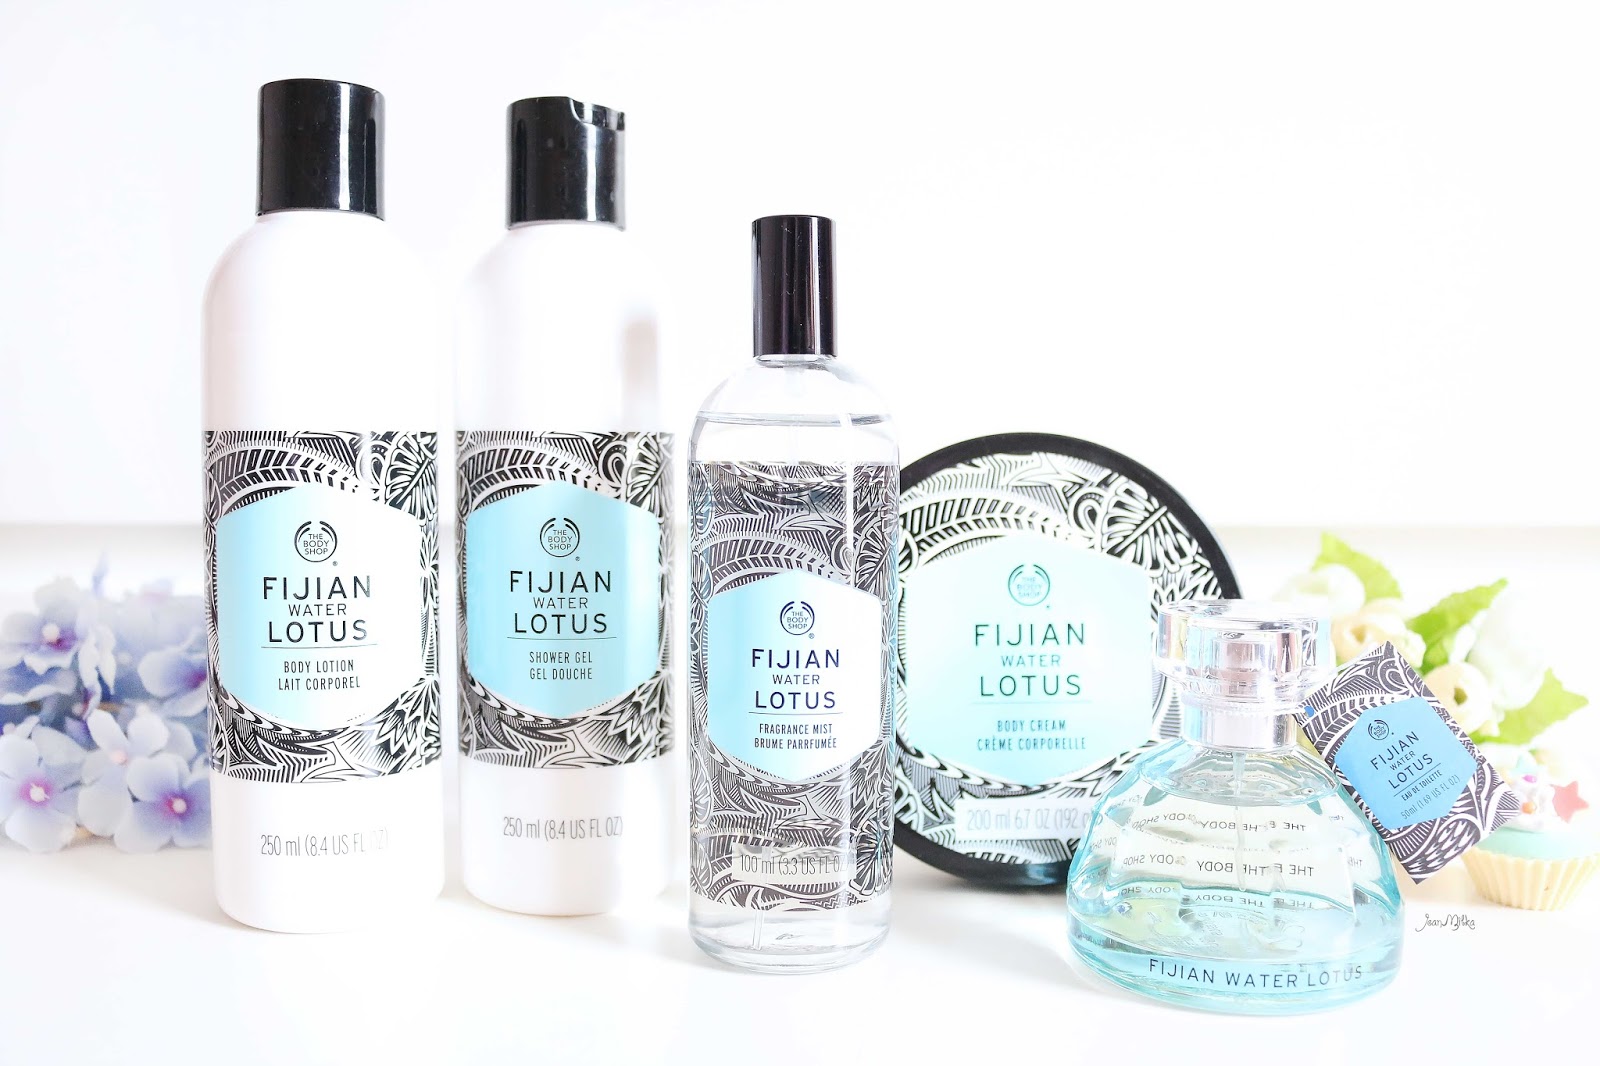 the body shop, body shop, review, beauty, skincare, fijian water lotus, the body shop voyage collection, voyage collection, 